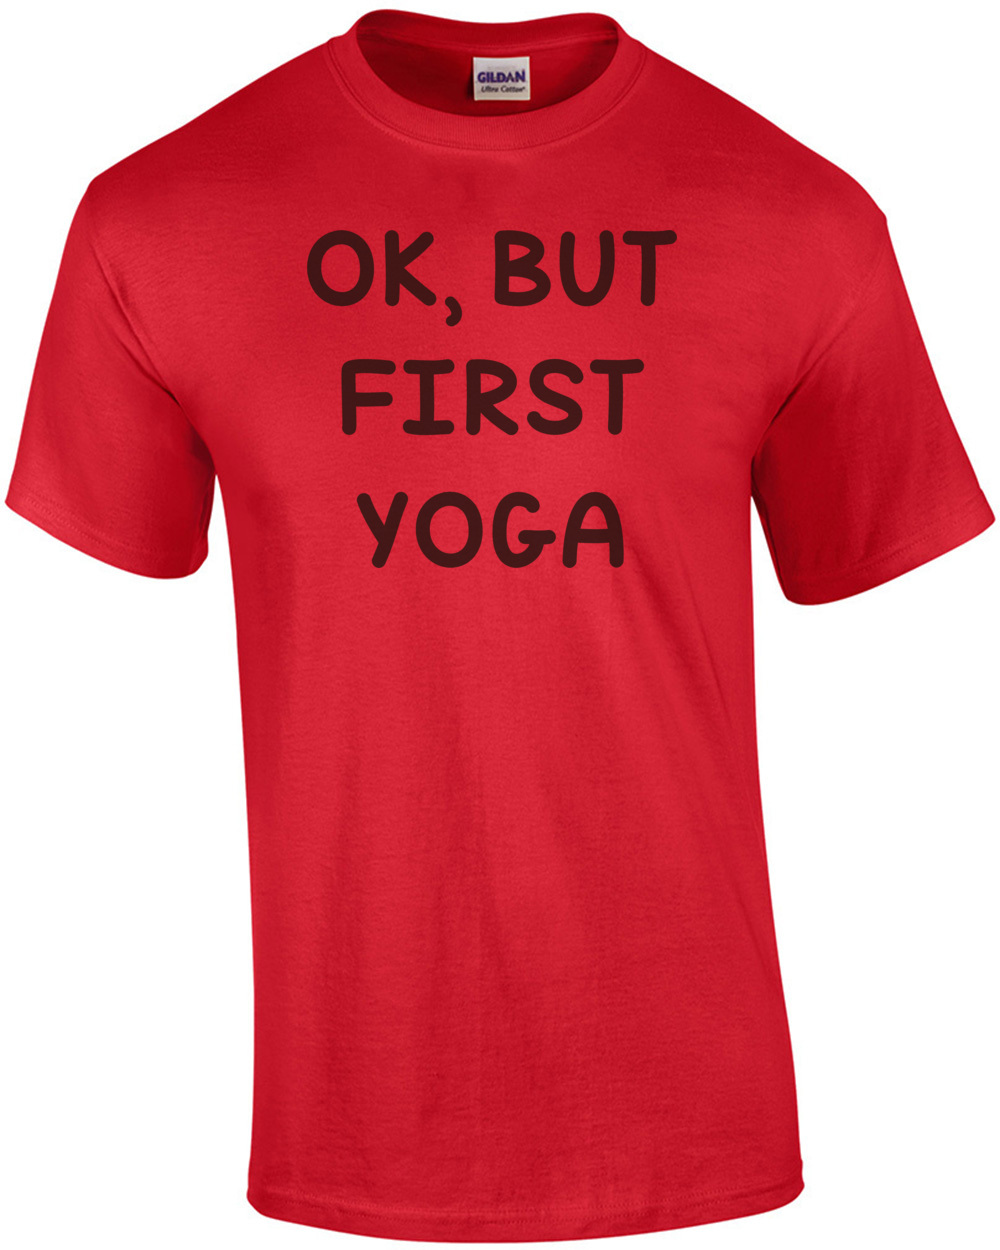 Ok But First Yoga T-Shirt Funny Yoga shirts with quotes T-Shirt